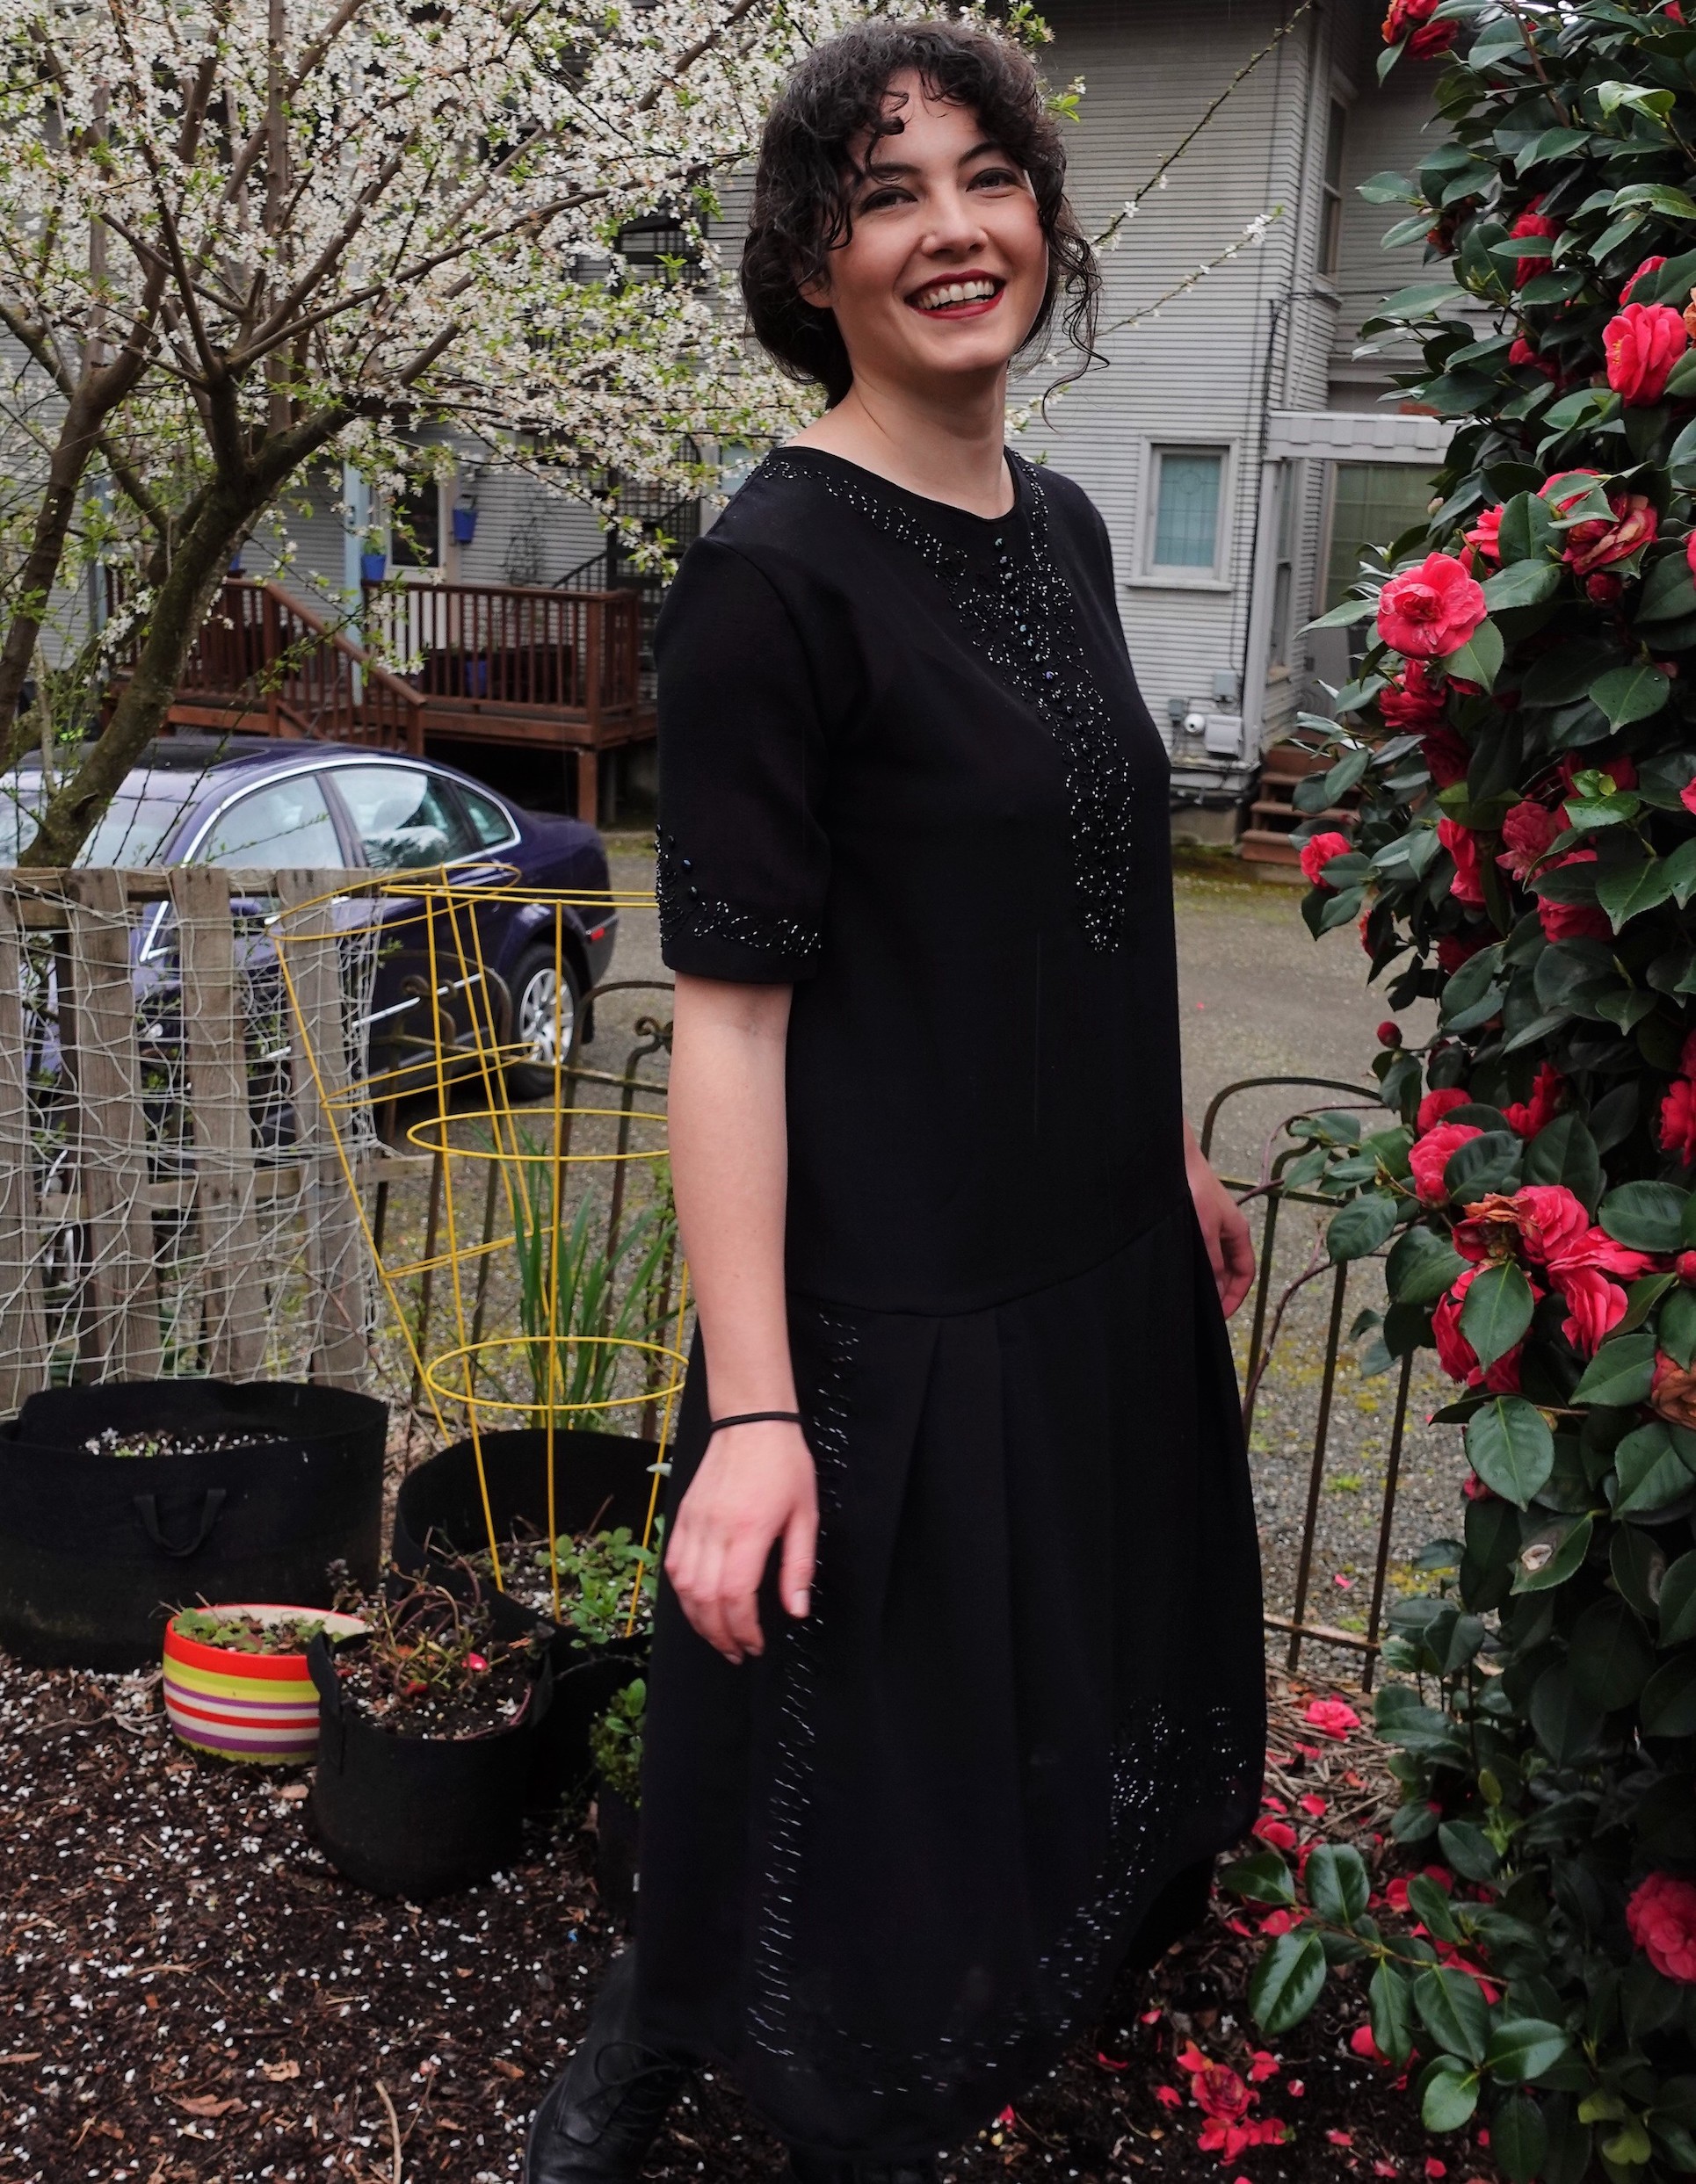 The Refashioned Dress by @mountain_fiber